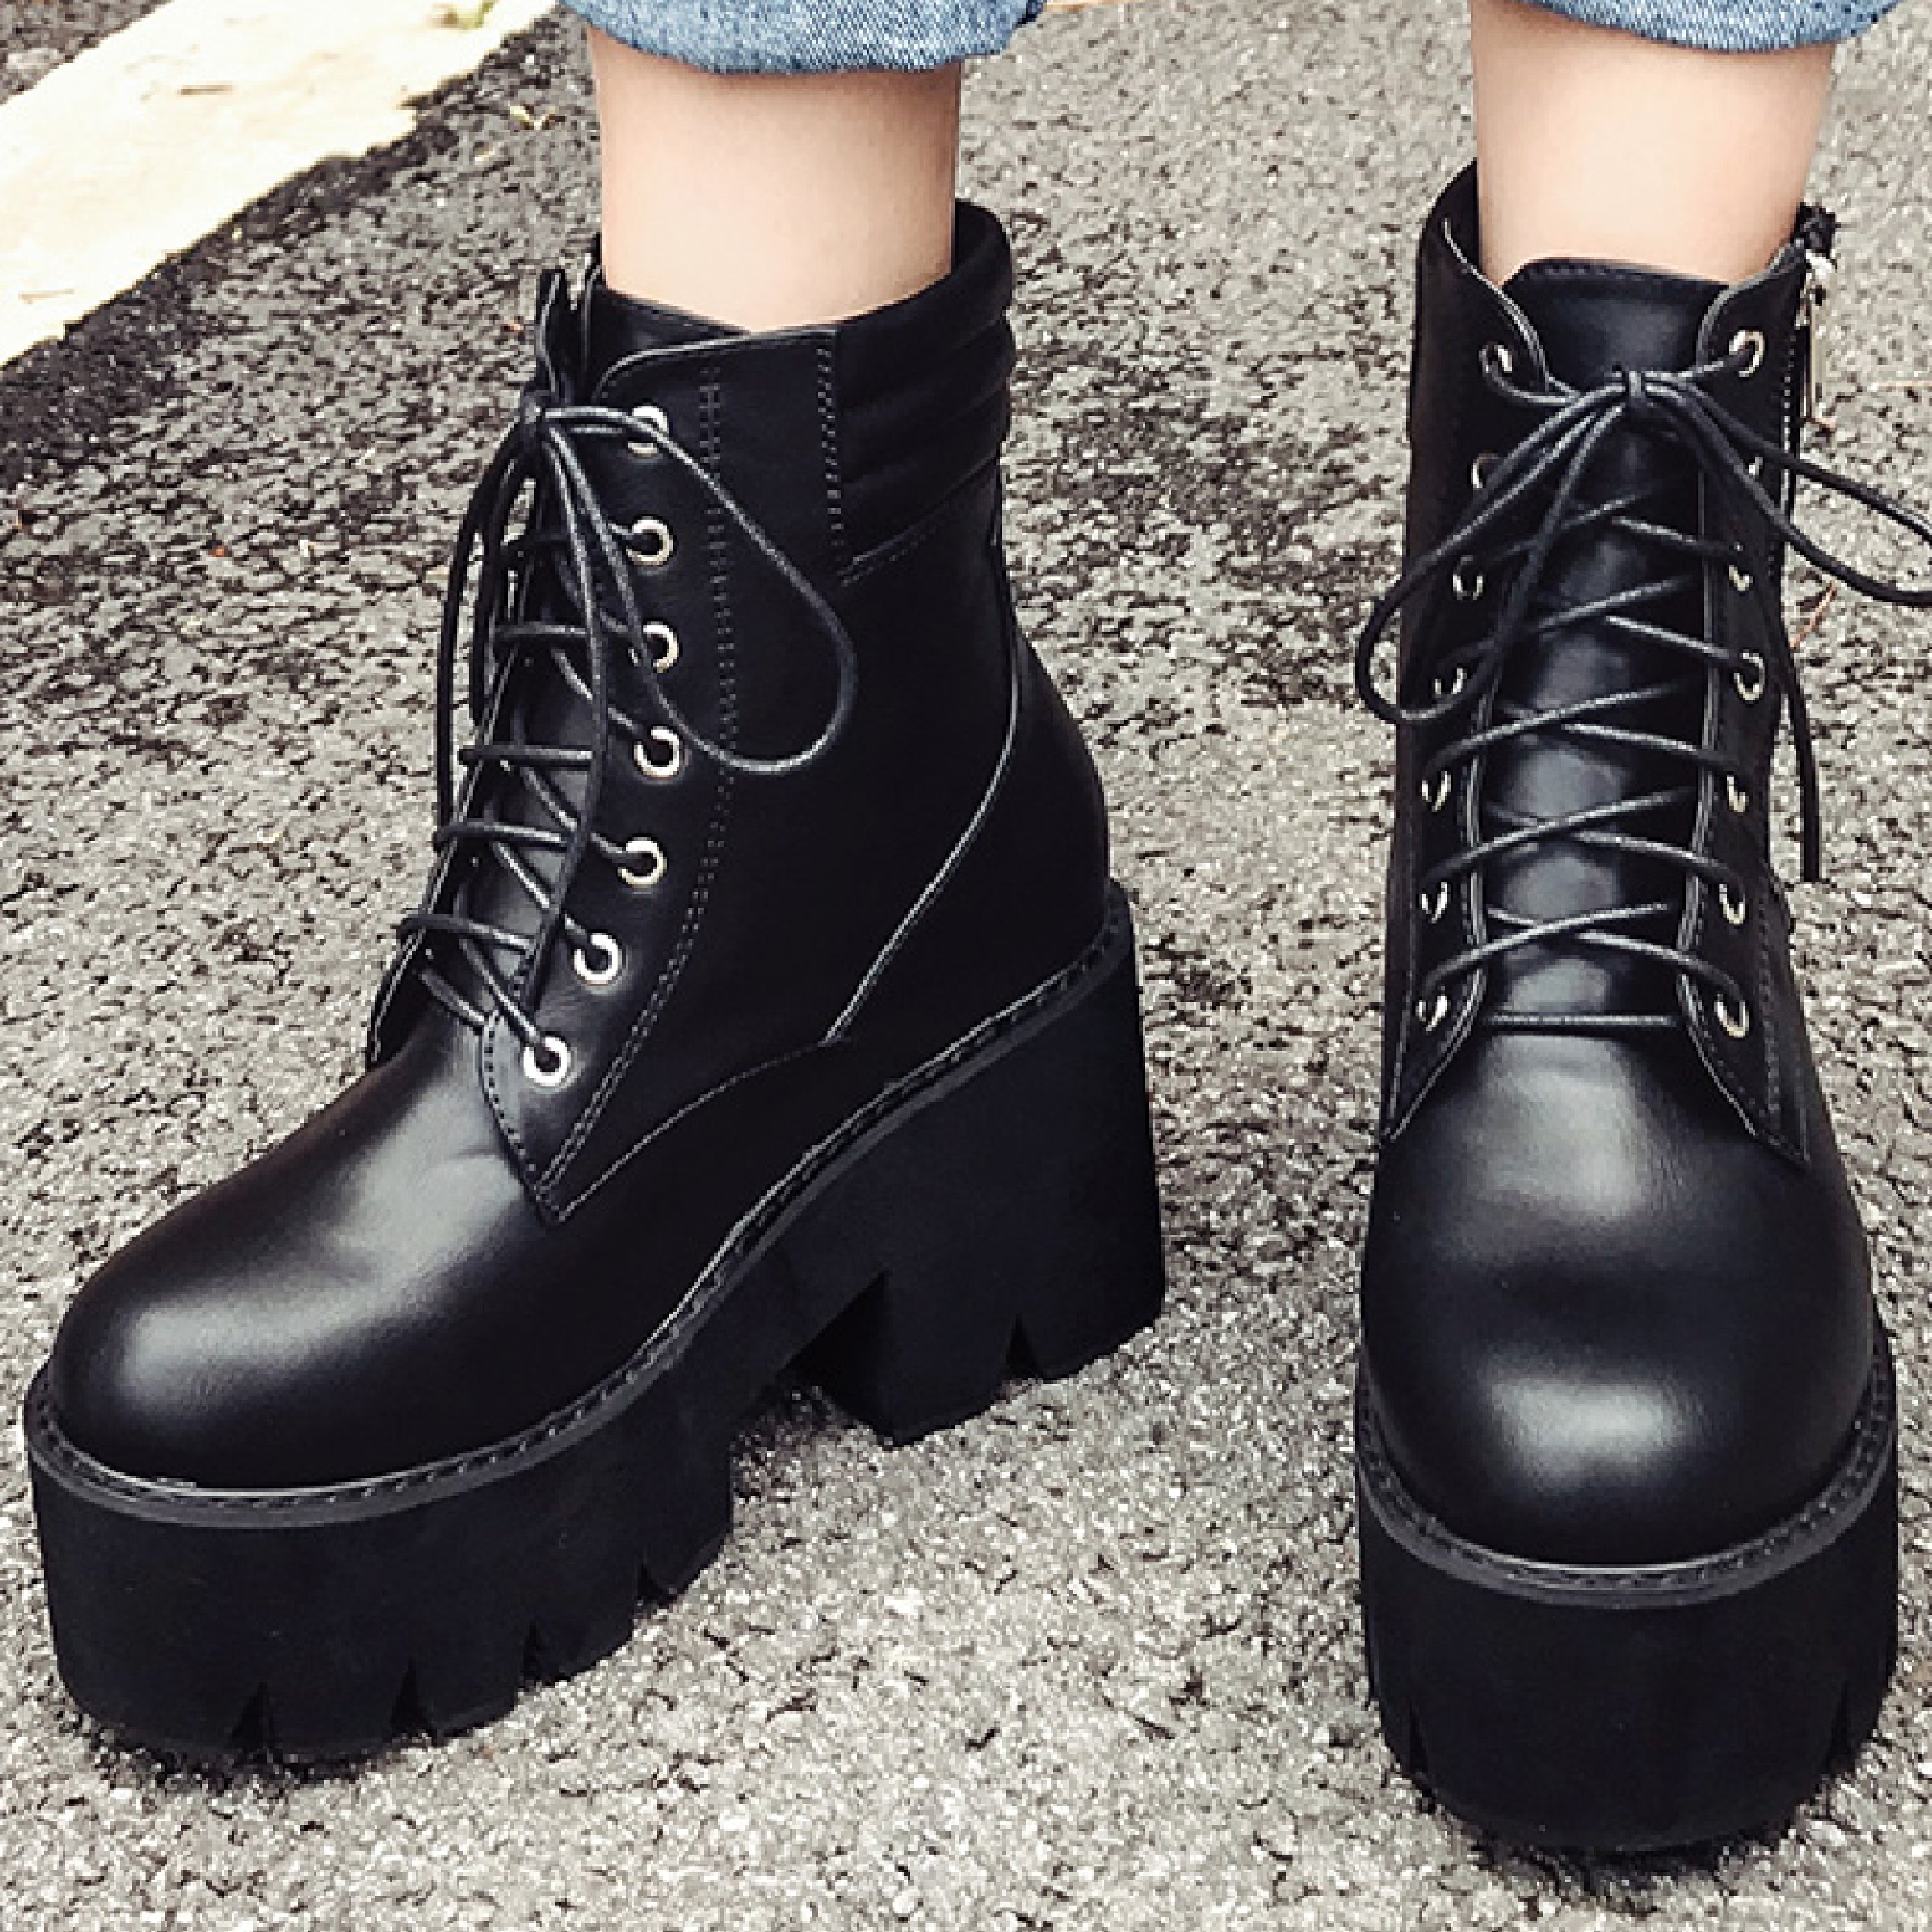 MUST HAVE FALL BOOTS SALE-Grunge COMBAT 